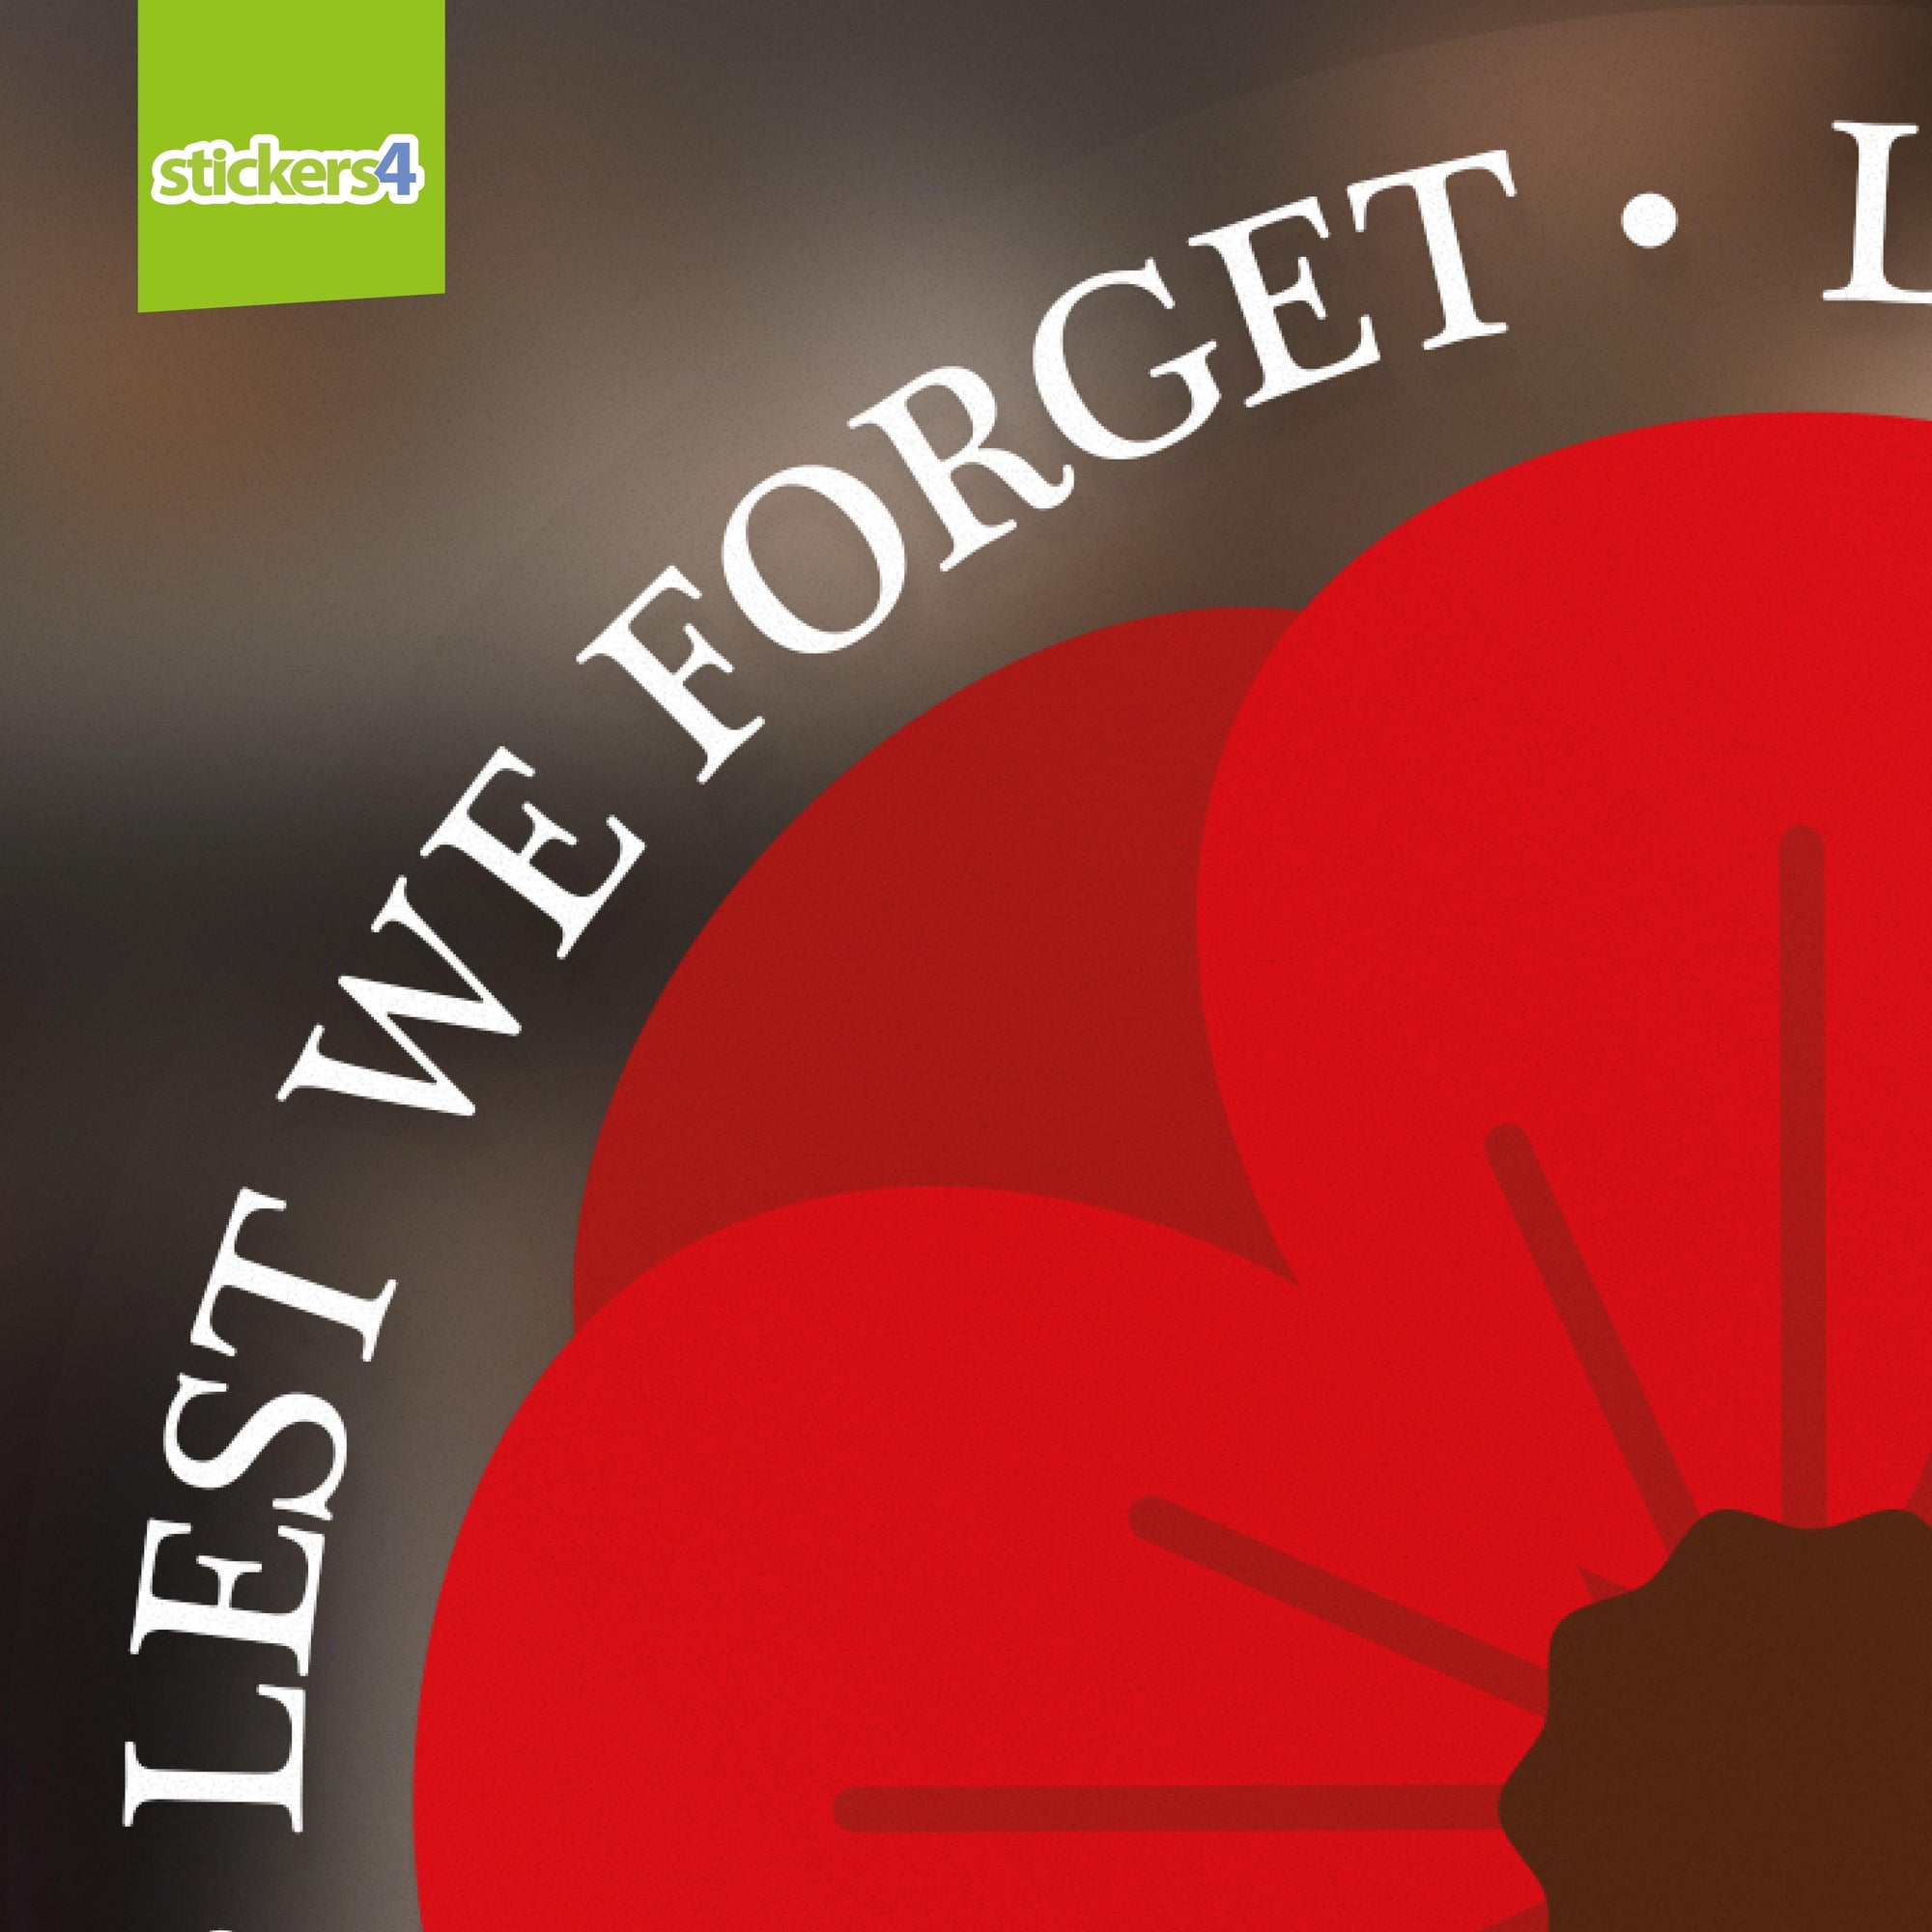 Lest We Forget Poppy Roundel - Remembrance Day Window Sticker Remembrance Window Display